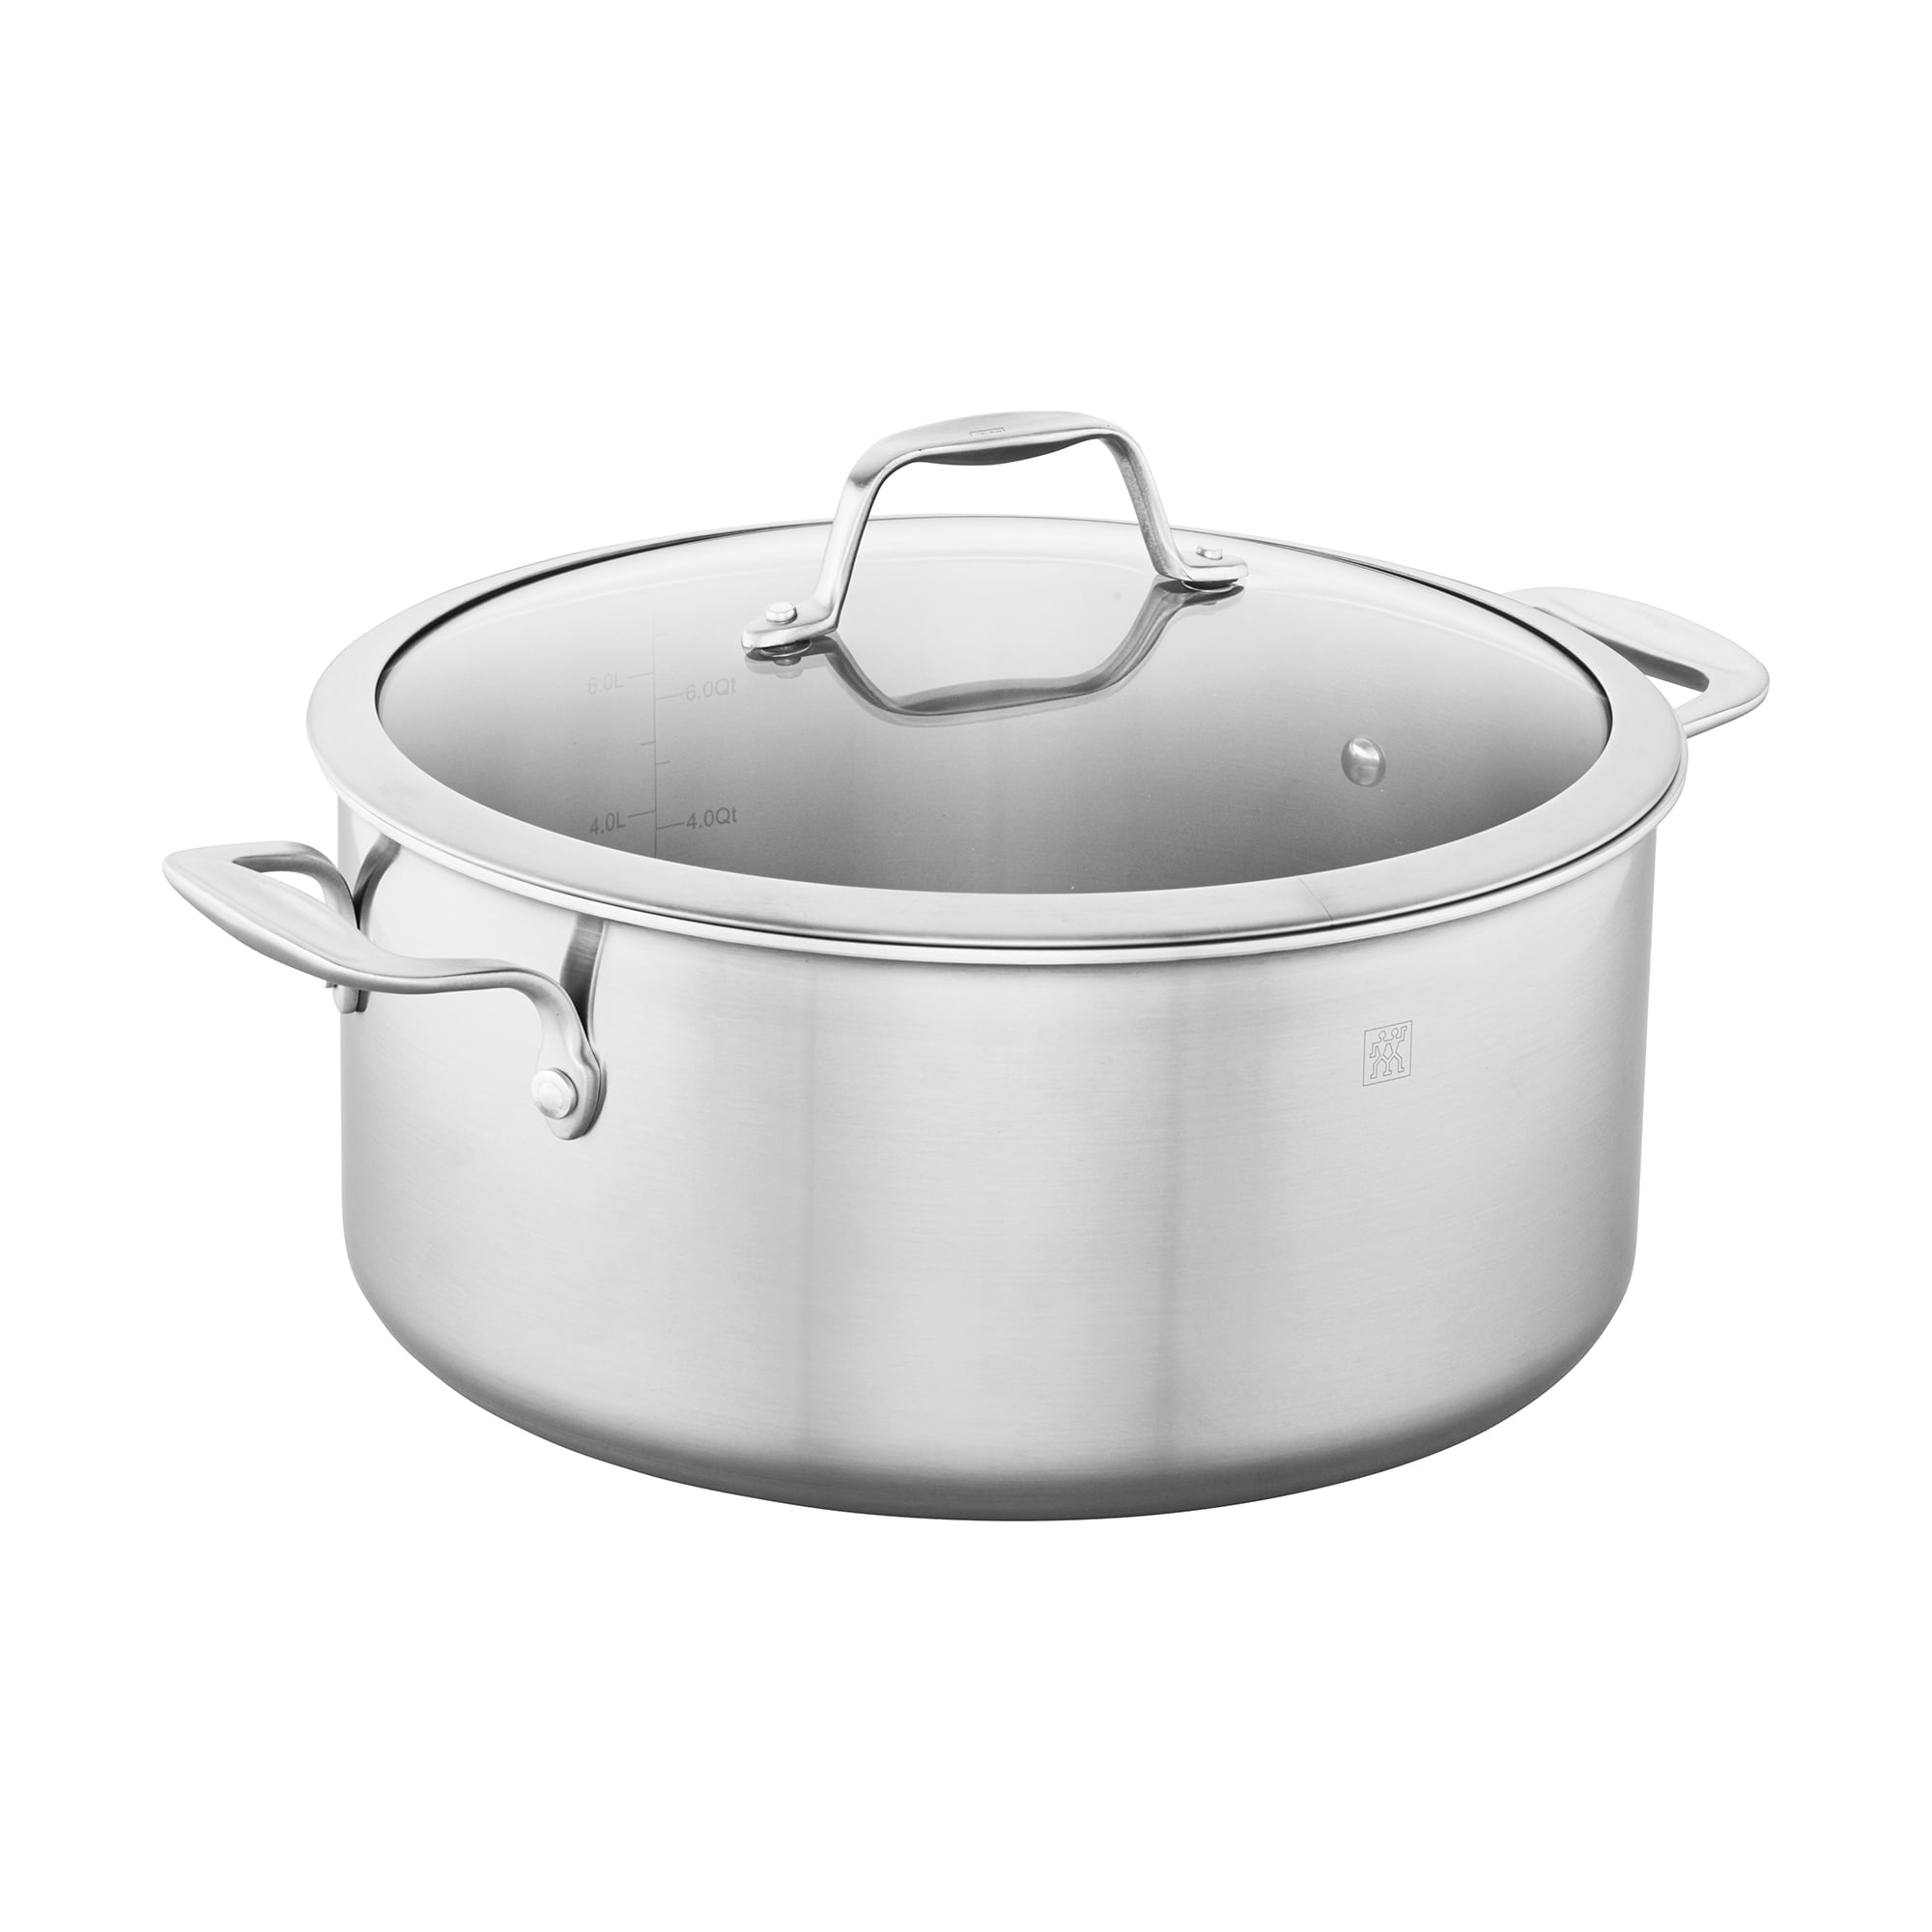 Fits 6-qt Dutch Oven ZWILLING Spirit 3-ply 6-qt Stainless Steel Pasta Insert 